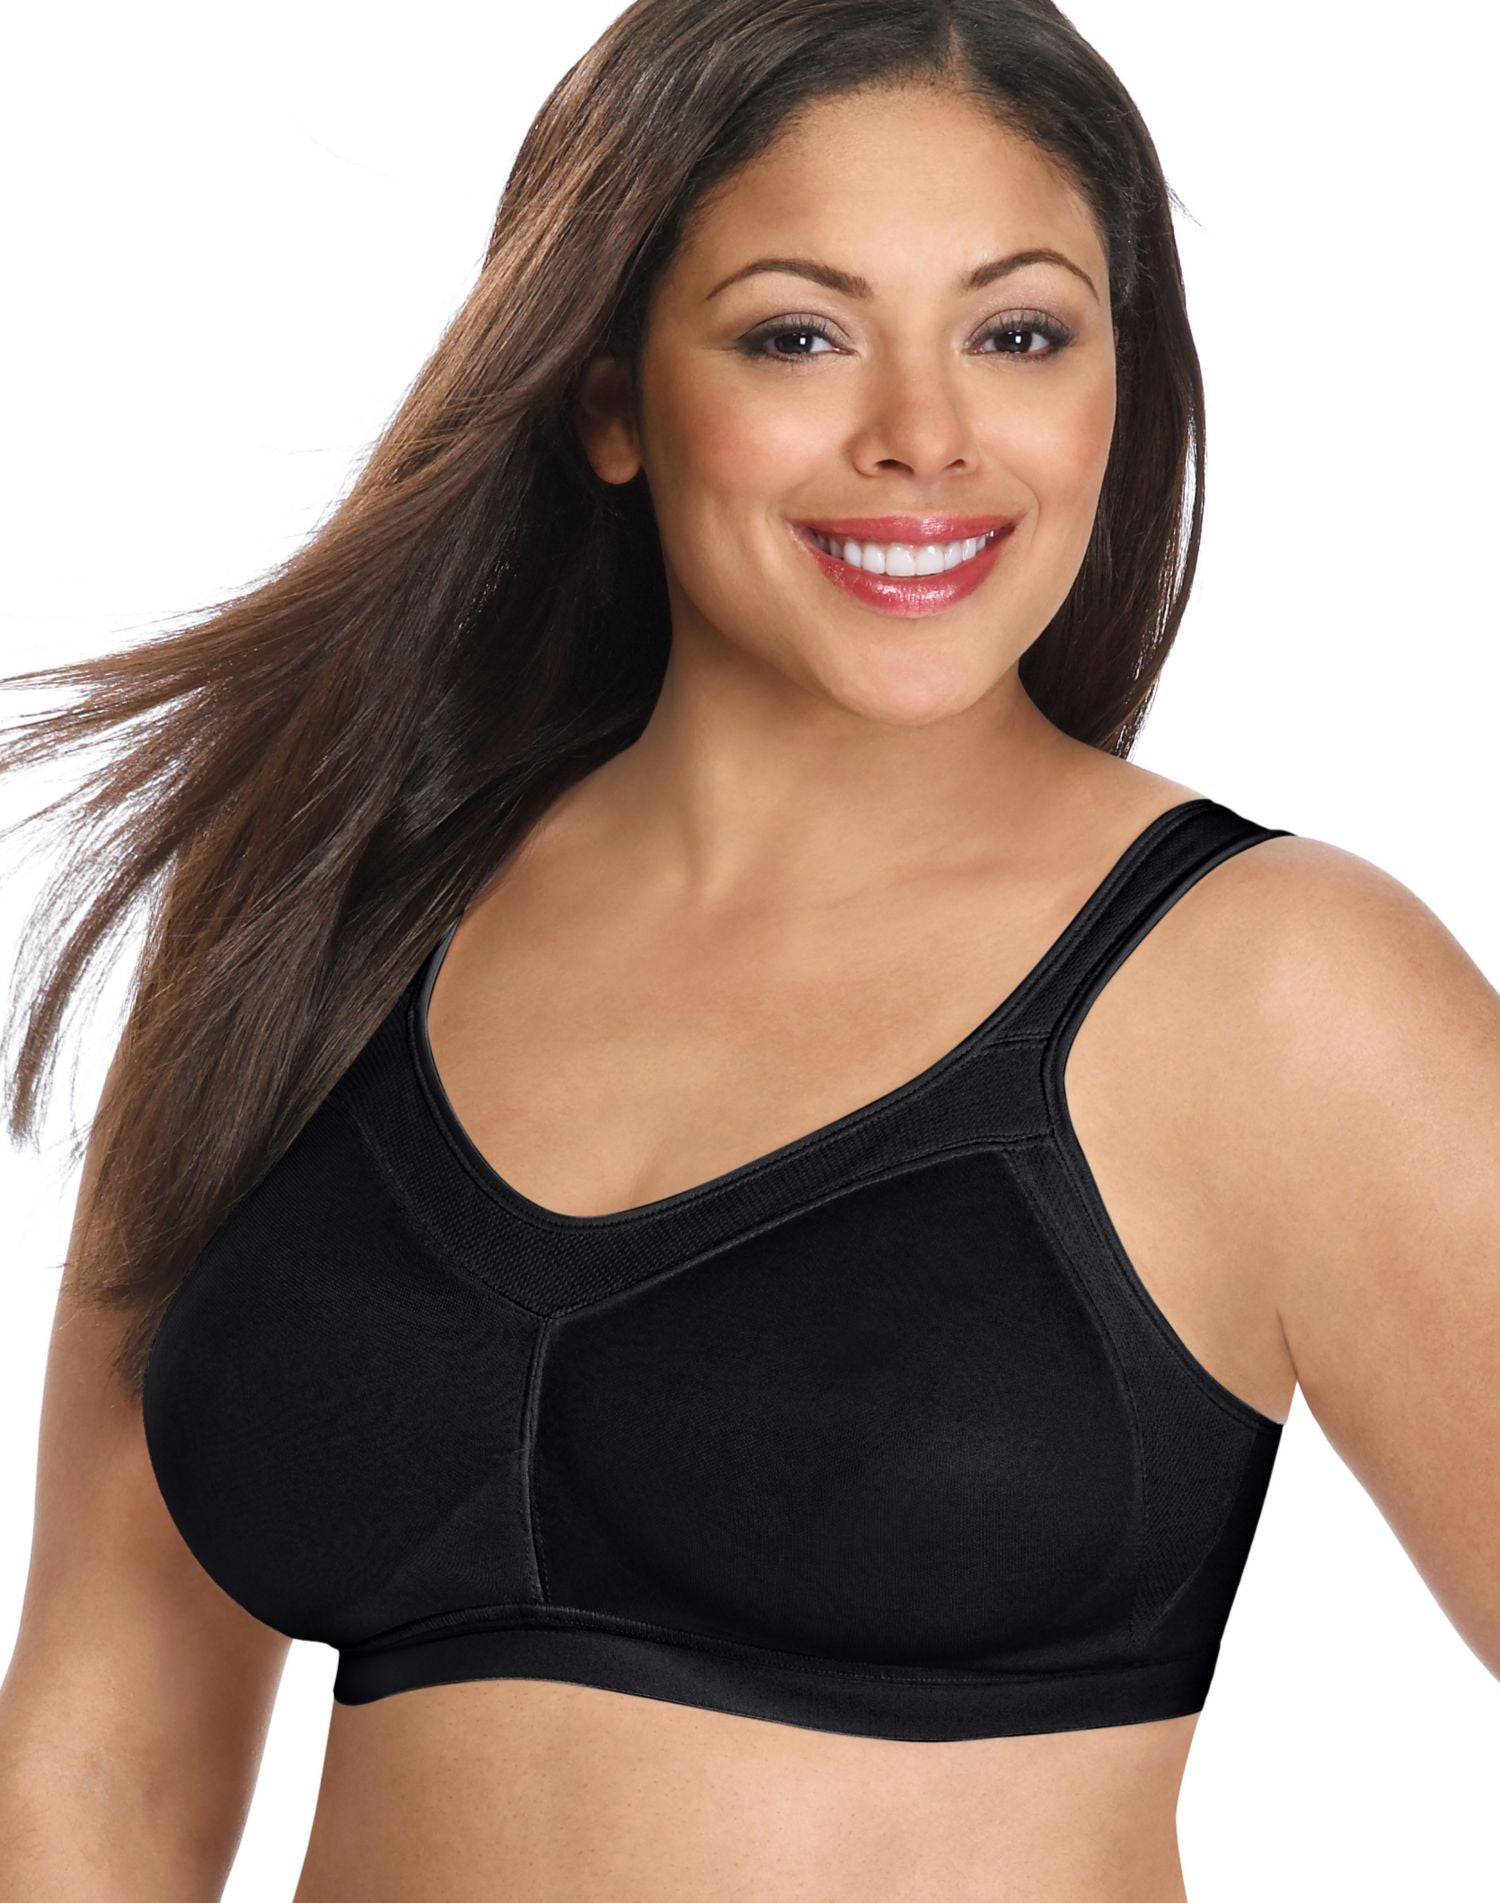 Playtex 18 Hour Active Lifestyle Wirefree Bra (4159) Light Beige, 38D at   Women's Clothing store